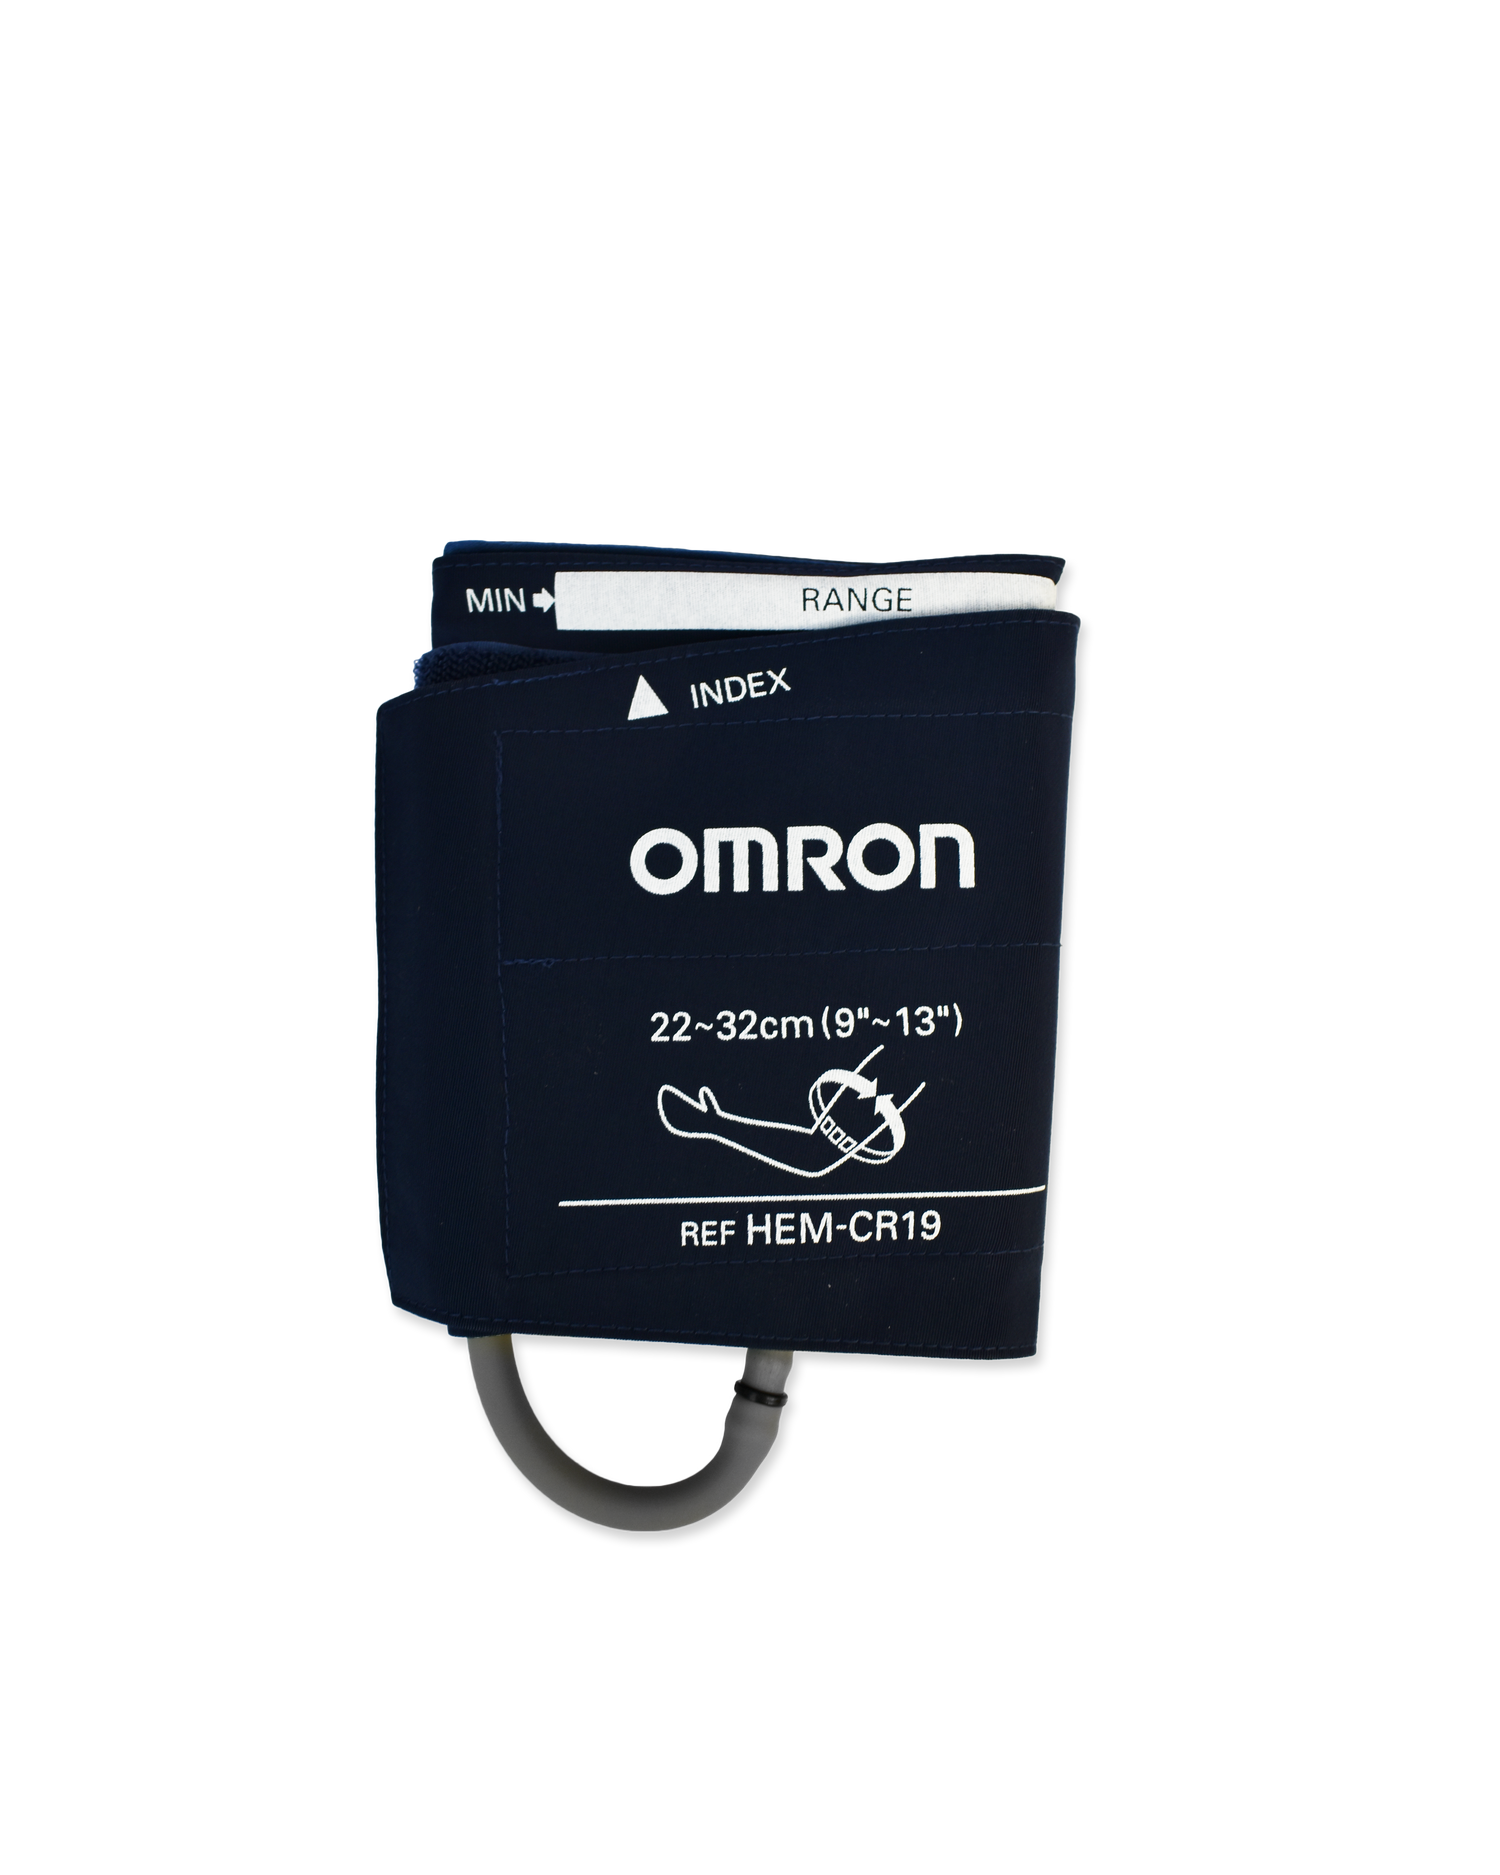 OMRON Extra Large Cuff for HEM-907XL Blood Pressure Monitors